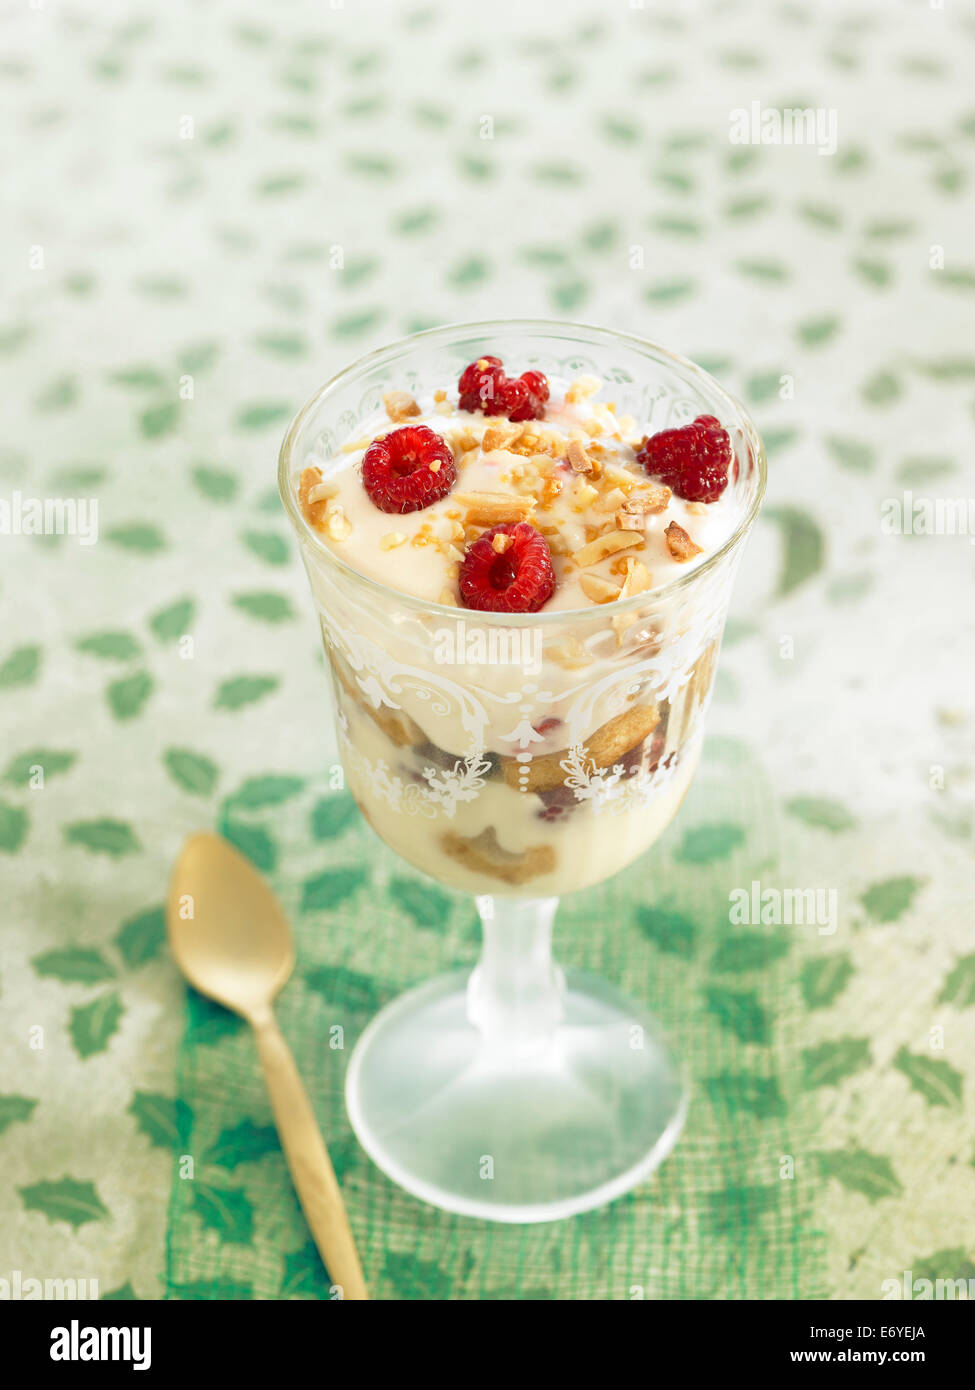 Yoghurt mousse with dried fruit and raspberries Stock Photo